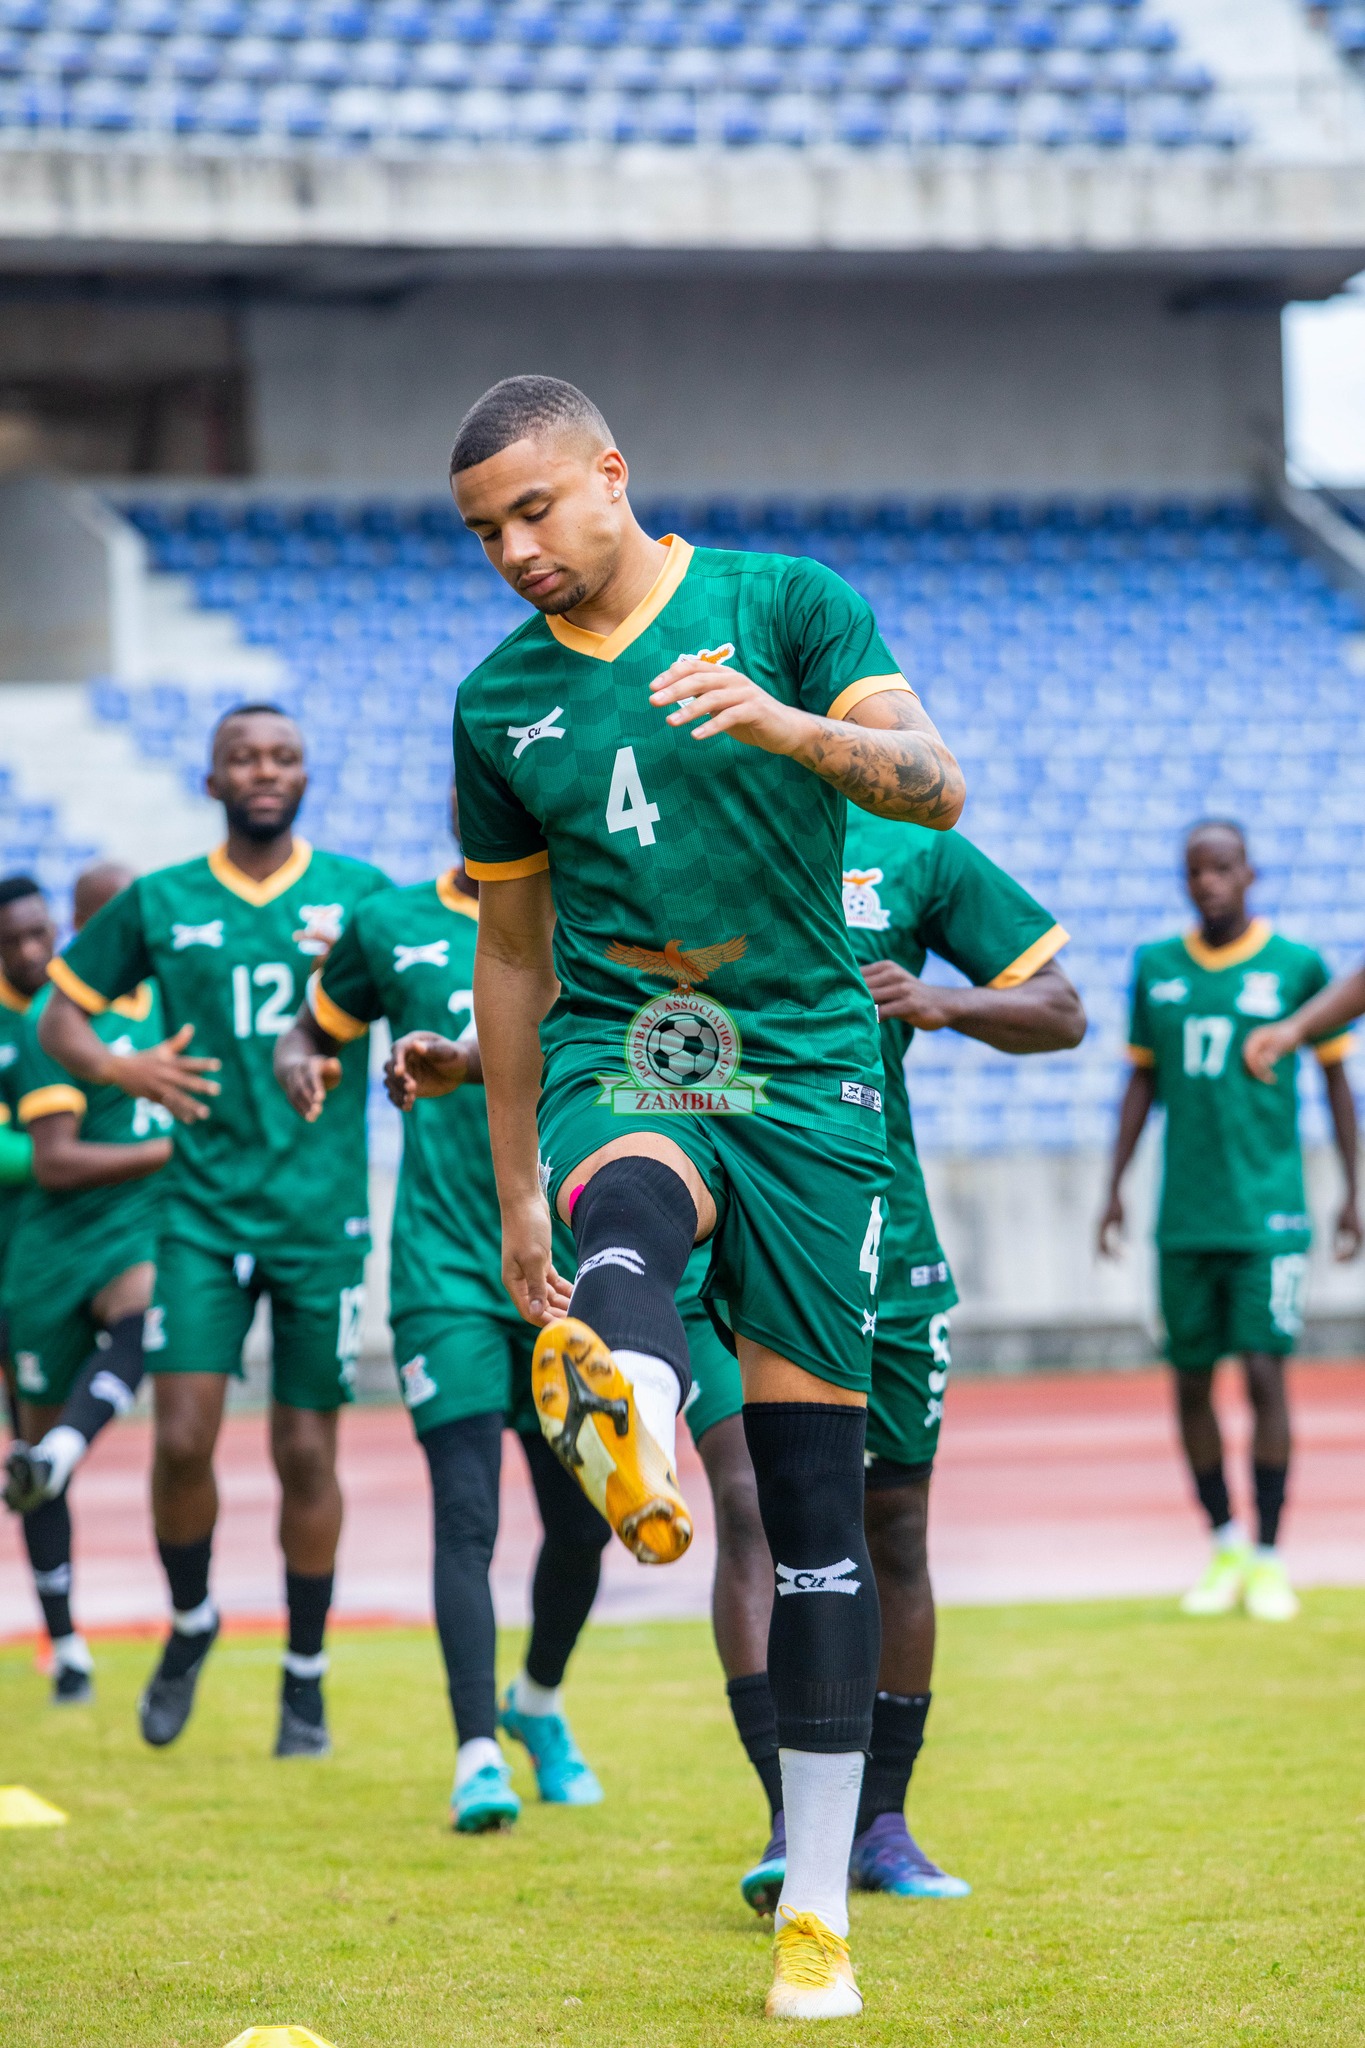 Zambian National Team Faces Egypt in High-Stakes International Friendly Match